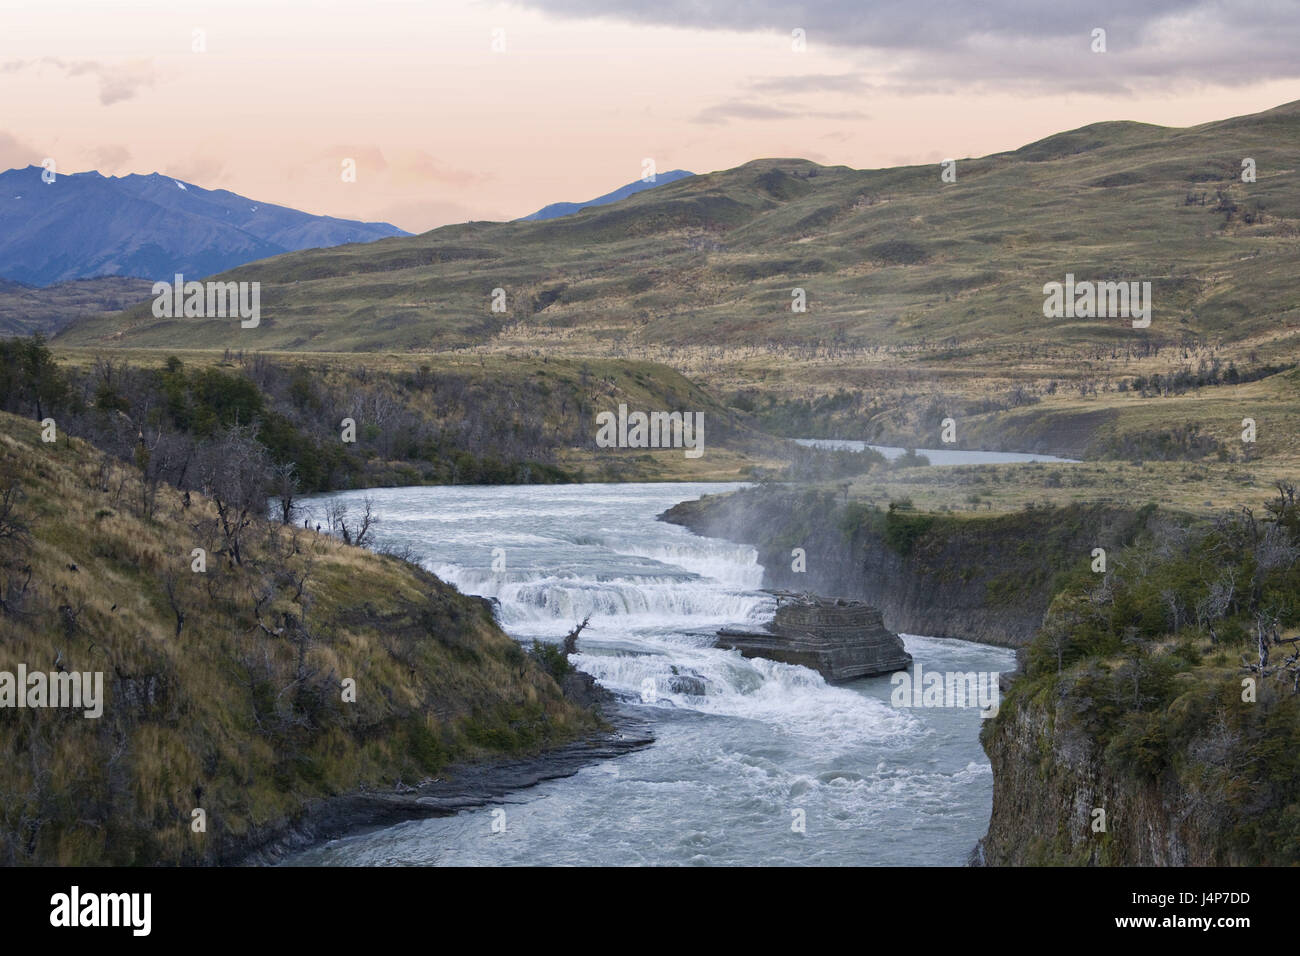 Chile, Patagonia, Torres del Paine National Park, river, waterfall, Stock Photo